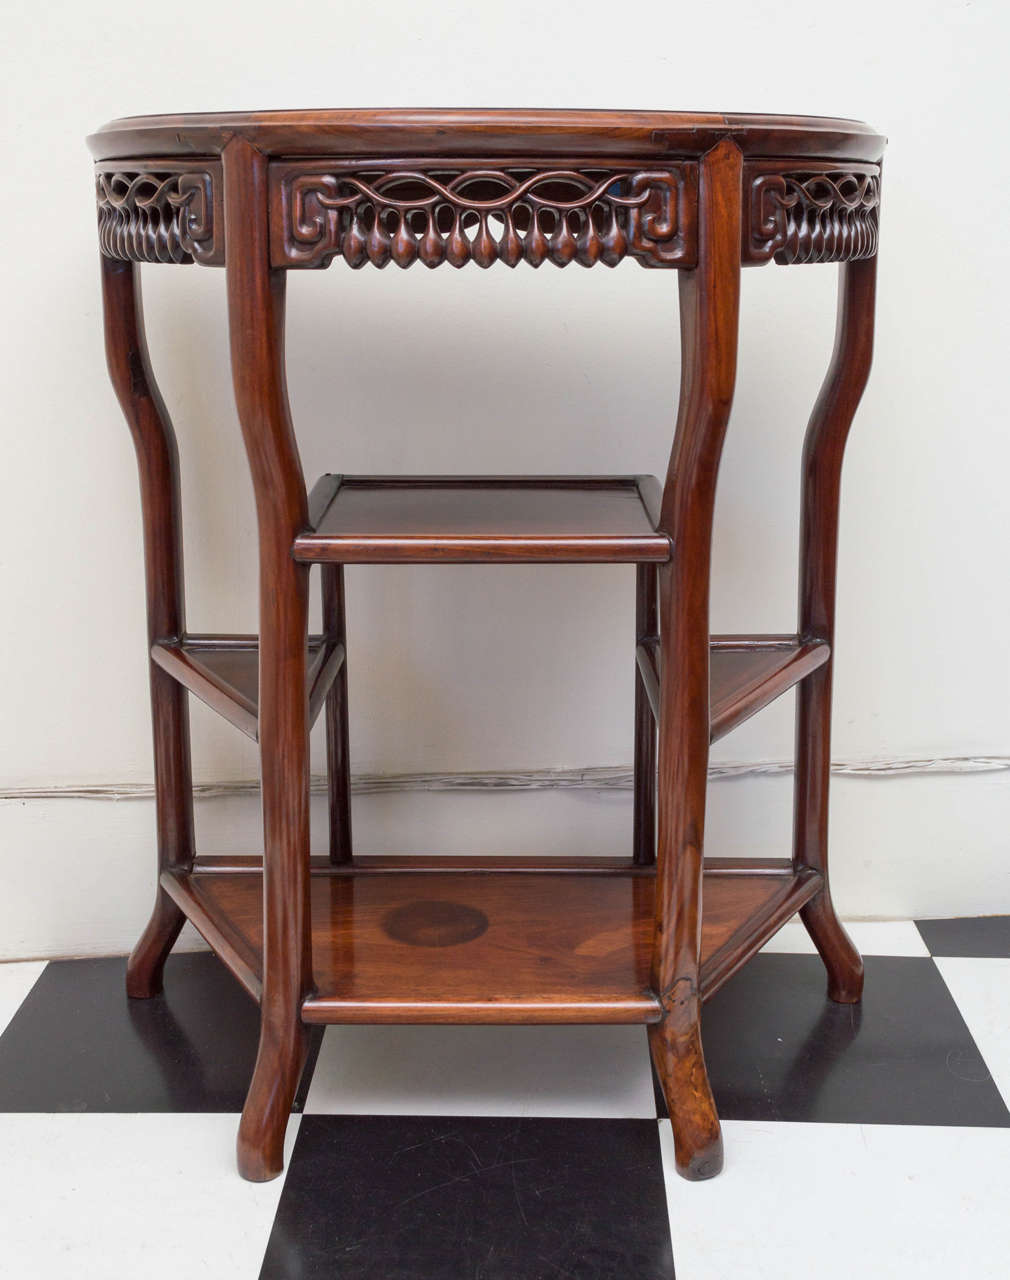 Late 19th century Chinese Hong Mu Hardwood demilune form table. Shaped legs, fitted shelves and interesting carved apron design.